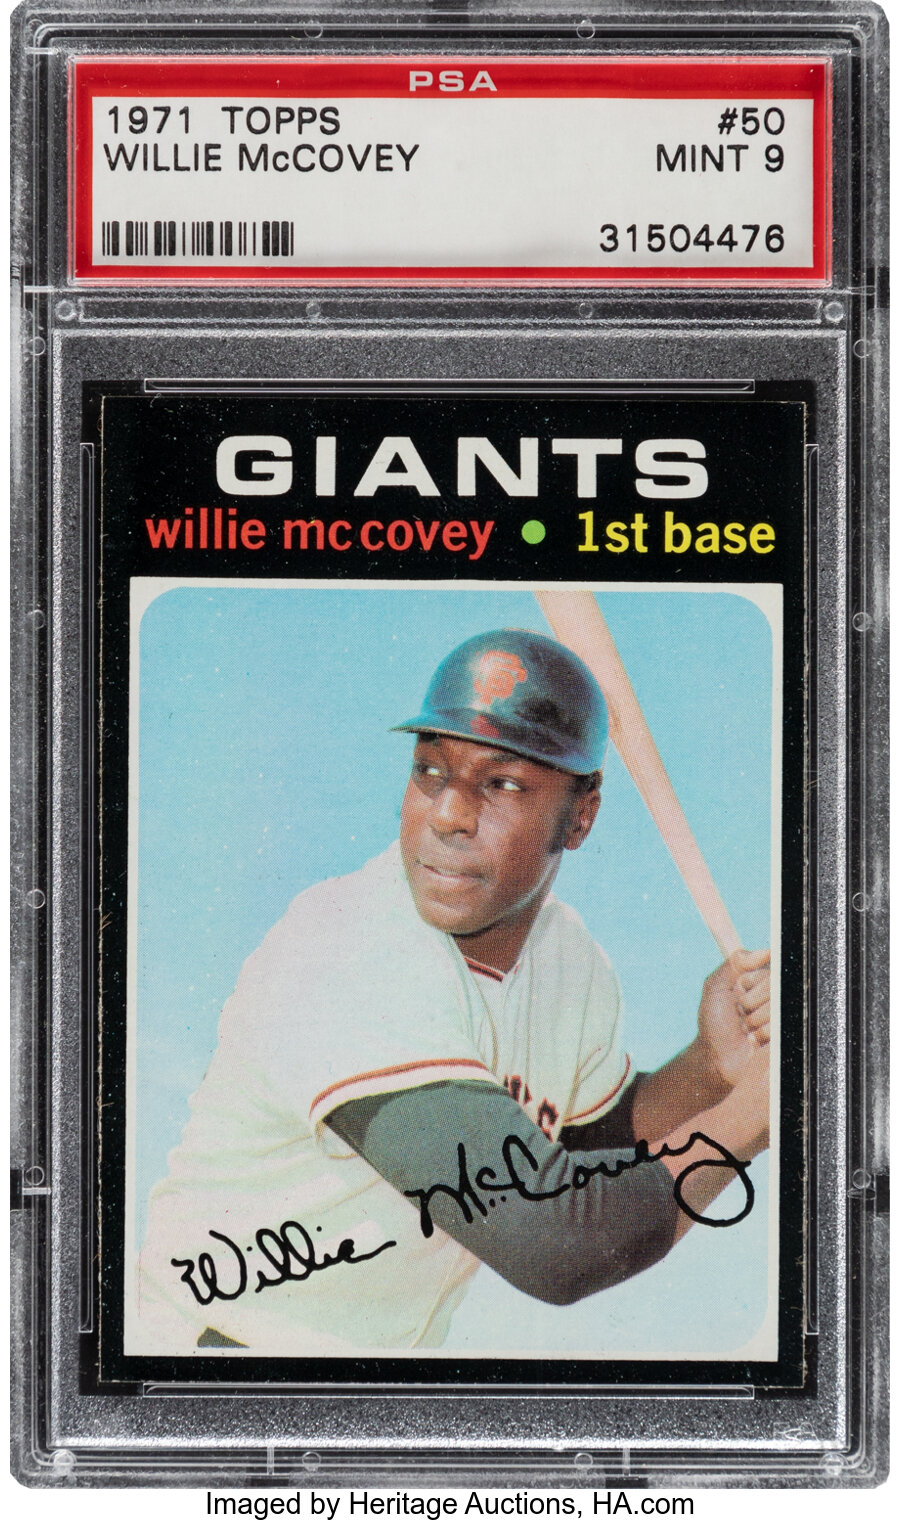 1971 Topps Willie McCovey #50 PSA Mint 9 - None Higher!